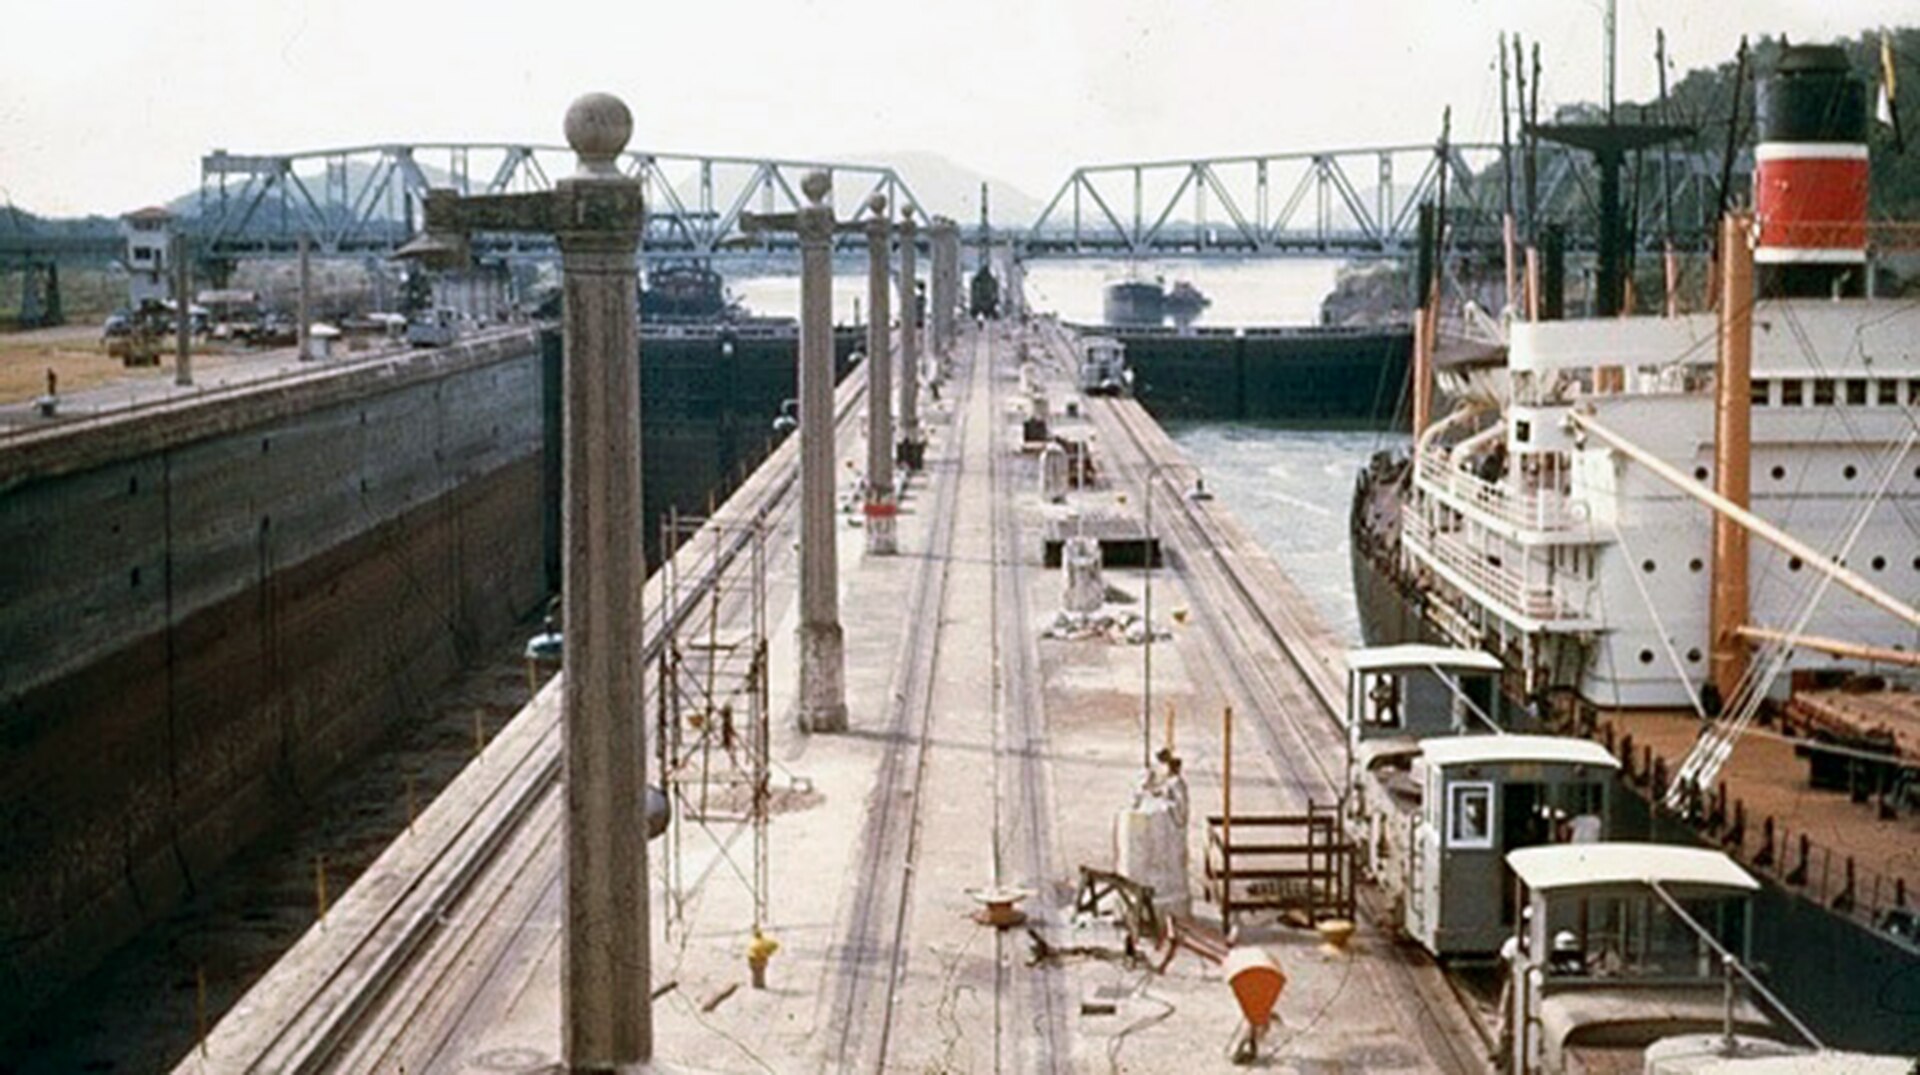 The Panama Canal in 1946.